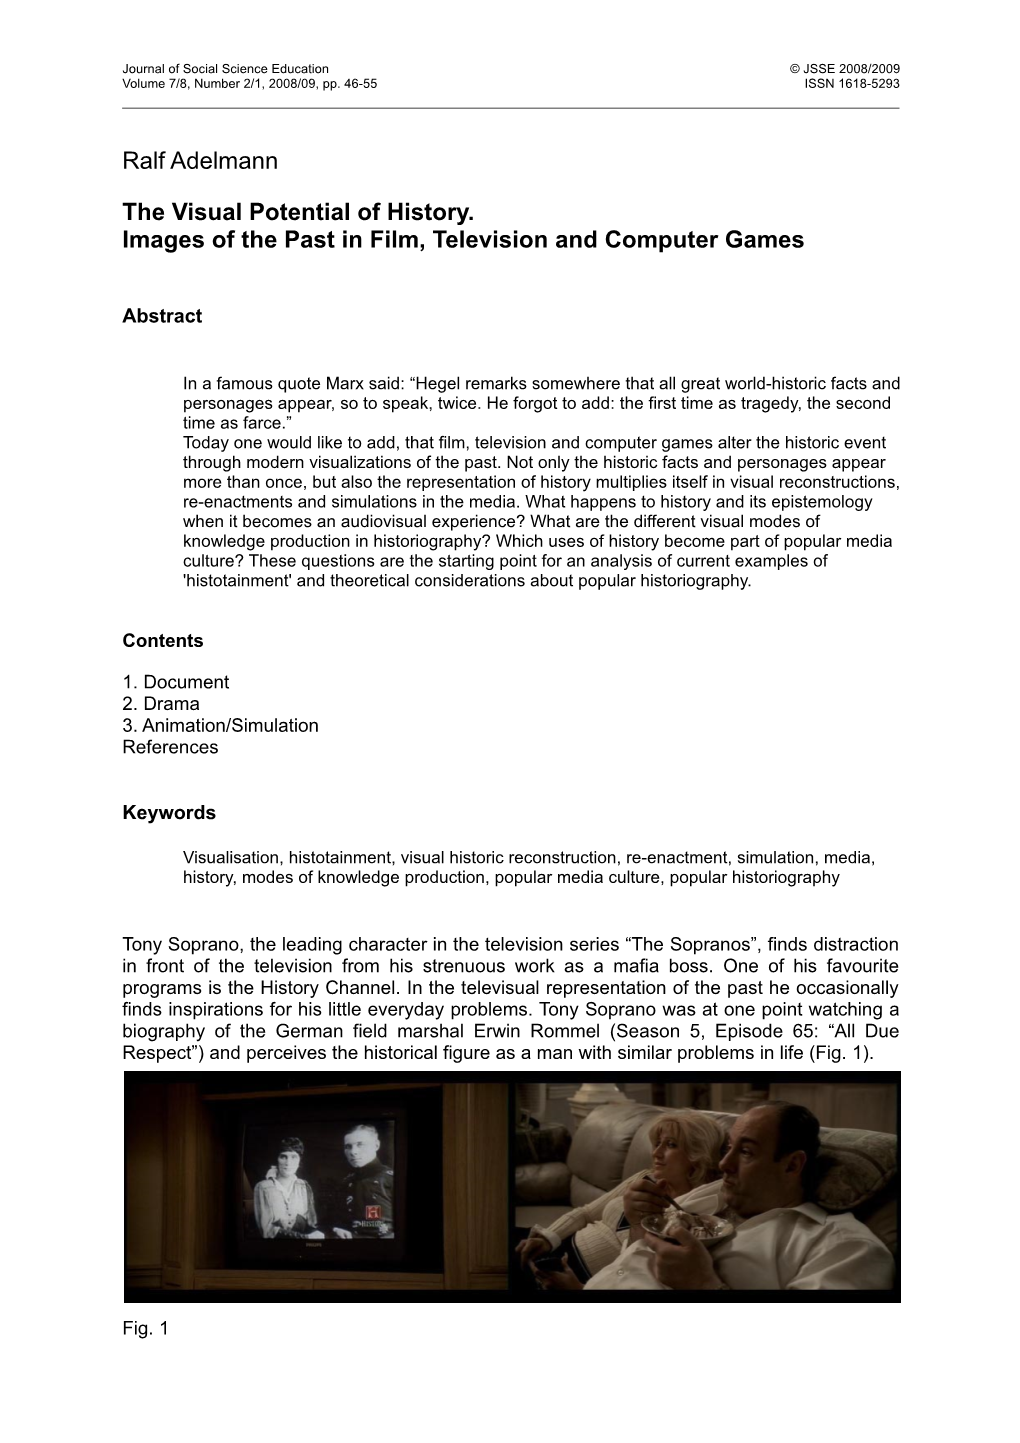 Ralf Adelmann the Visual Potential of History. Images of the Past in Film, Television and Computer Games